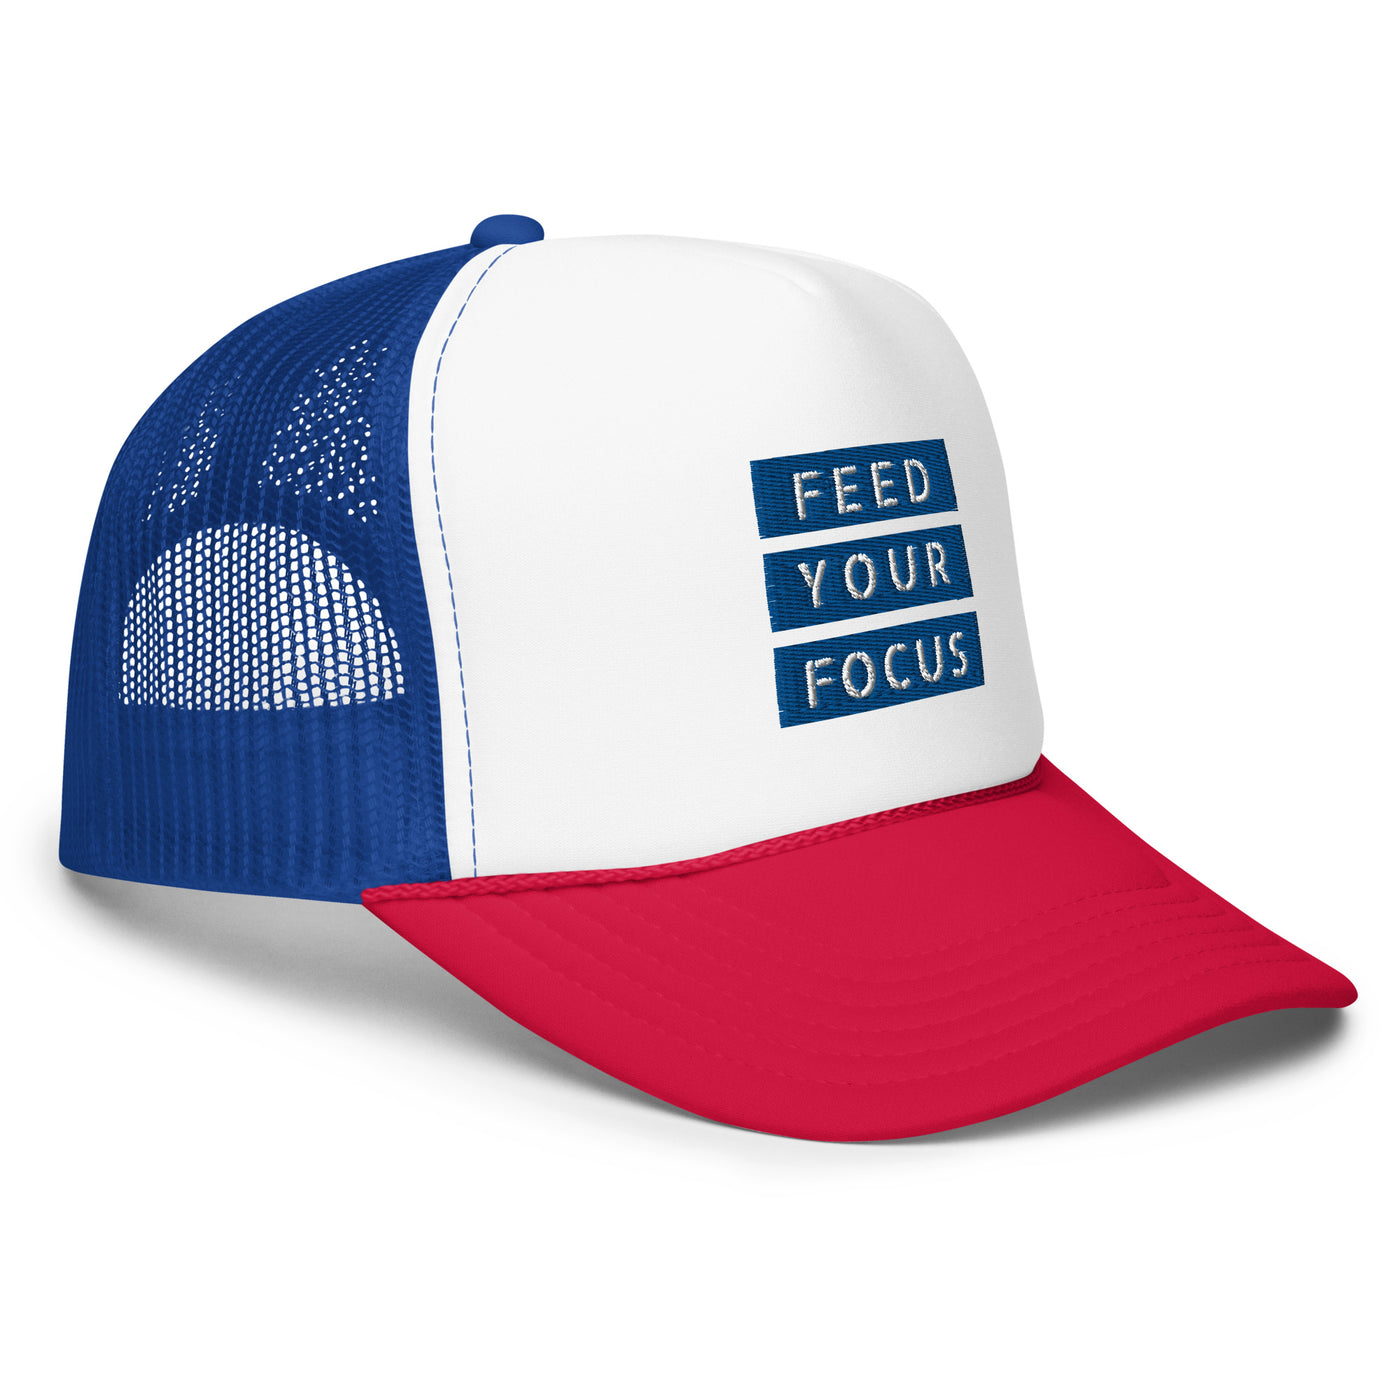 Foam Red and Royal Trucker Hat - Feed Your Focus